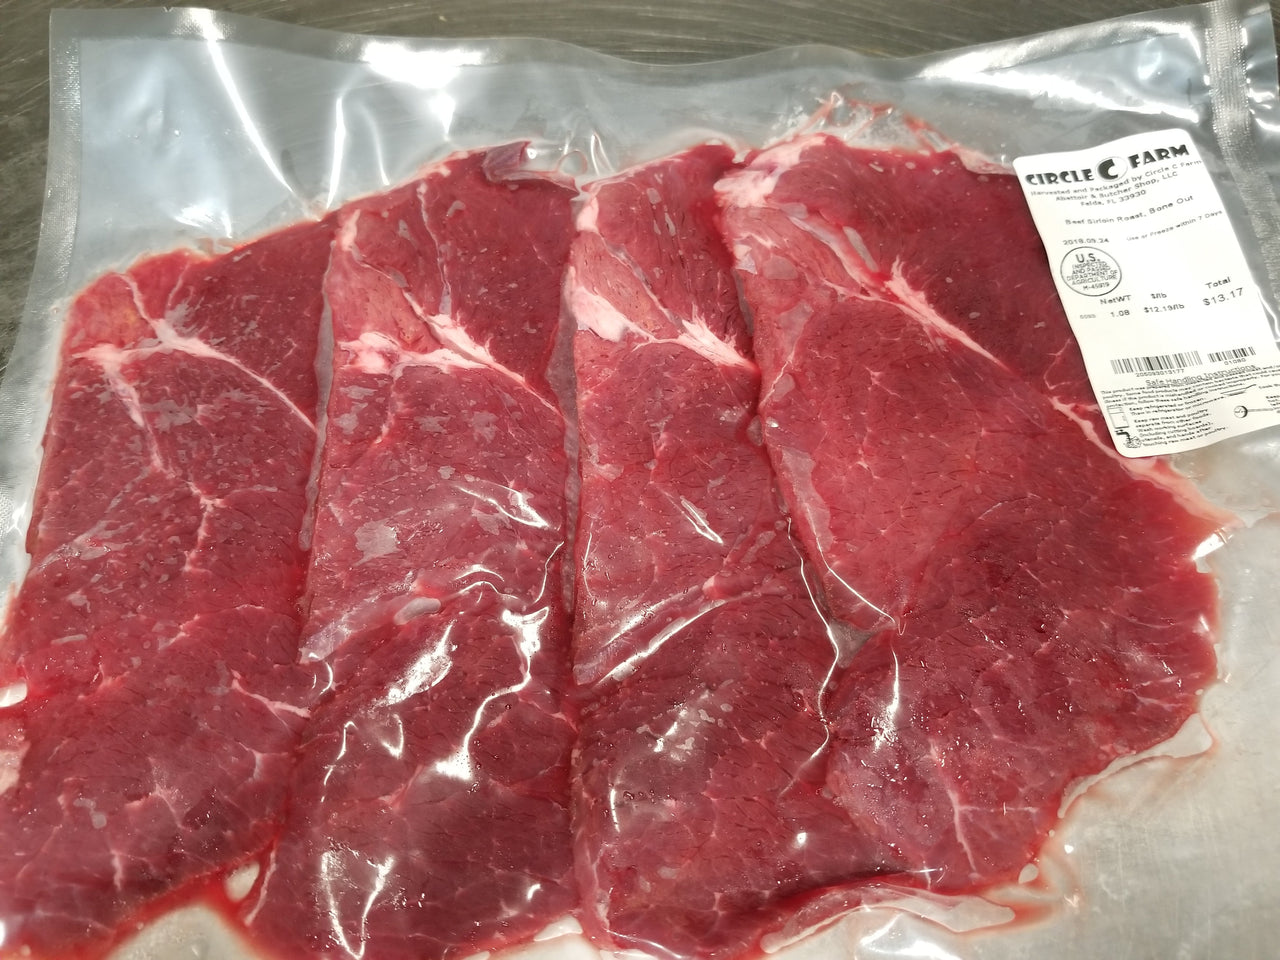 Grass Fed & Grass Finished Beef Sirloin Steak Cutlets, Approx. 1/4" thick - Circle C Farm